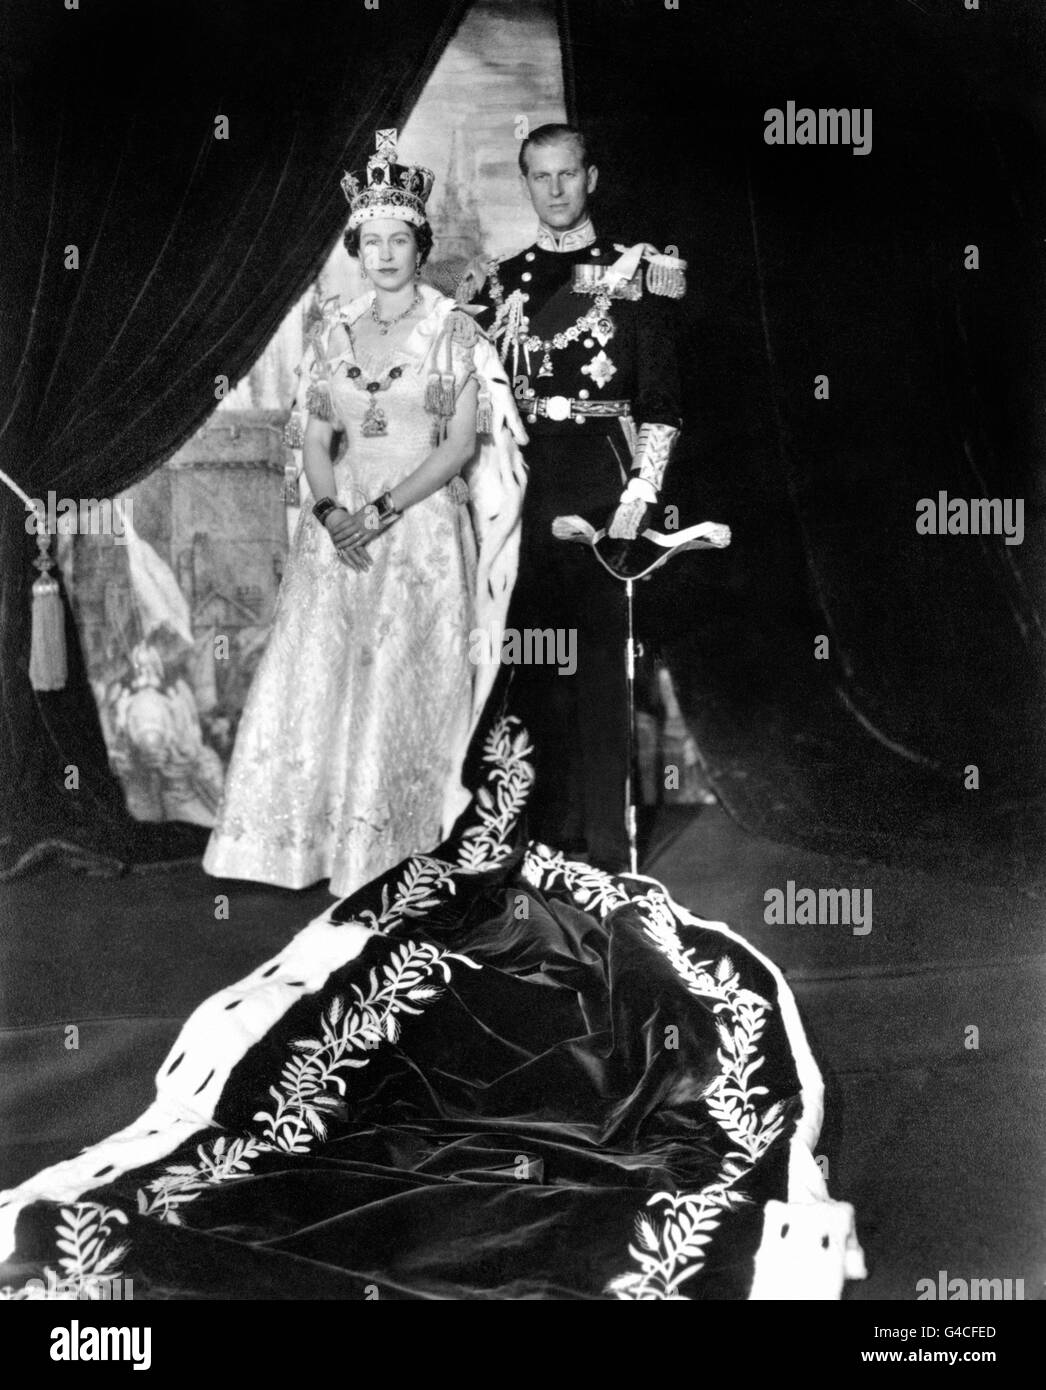 Queen Elizabeth Ii In The Throne Room Of Buckingham Palace High Resolution Stock Photography And Images Alamy